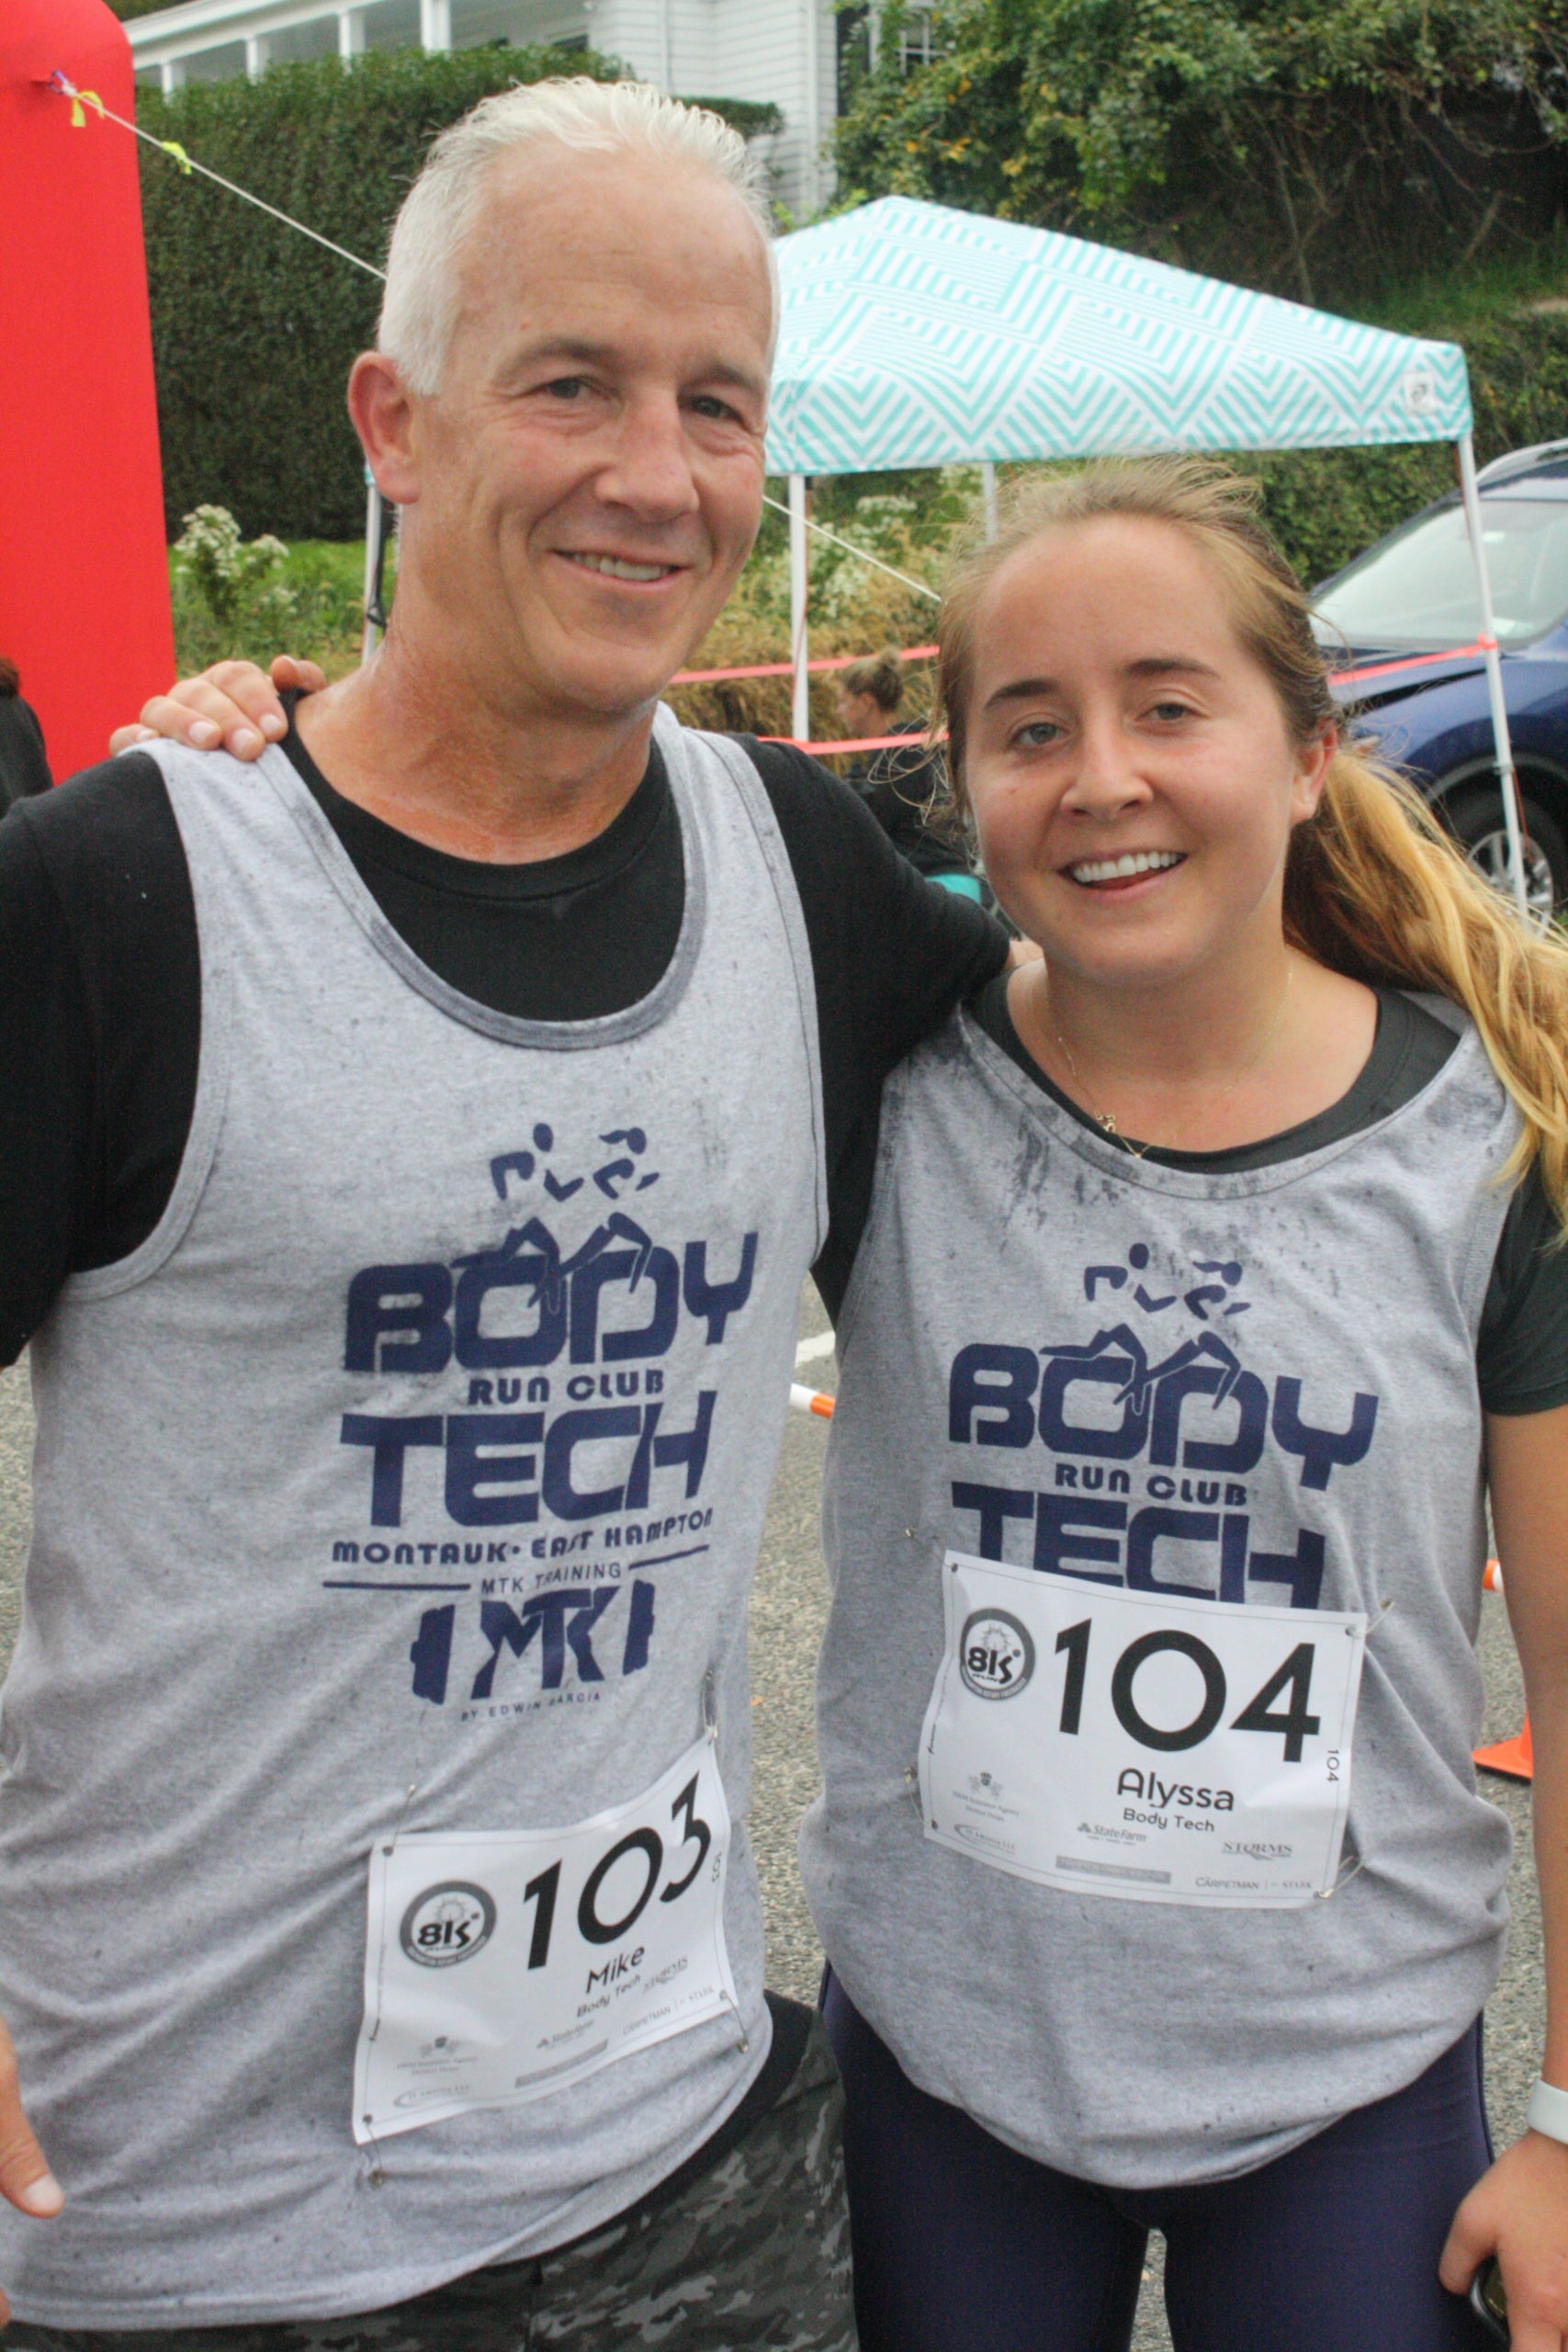 Mike Bahel and his daughter, Alyssa Bahel, who was the top female finisher in the race.